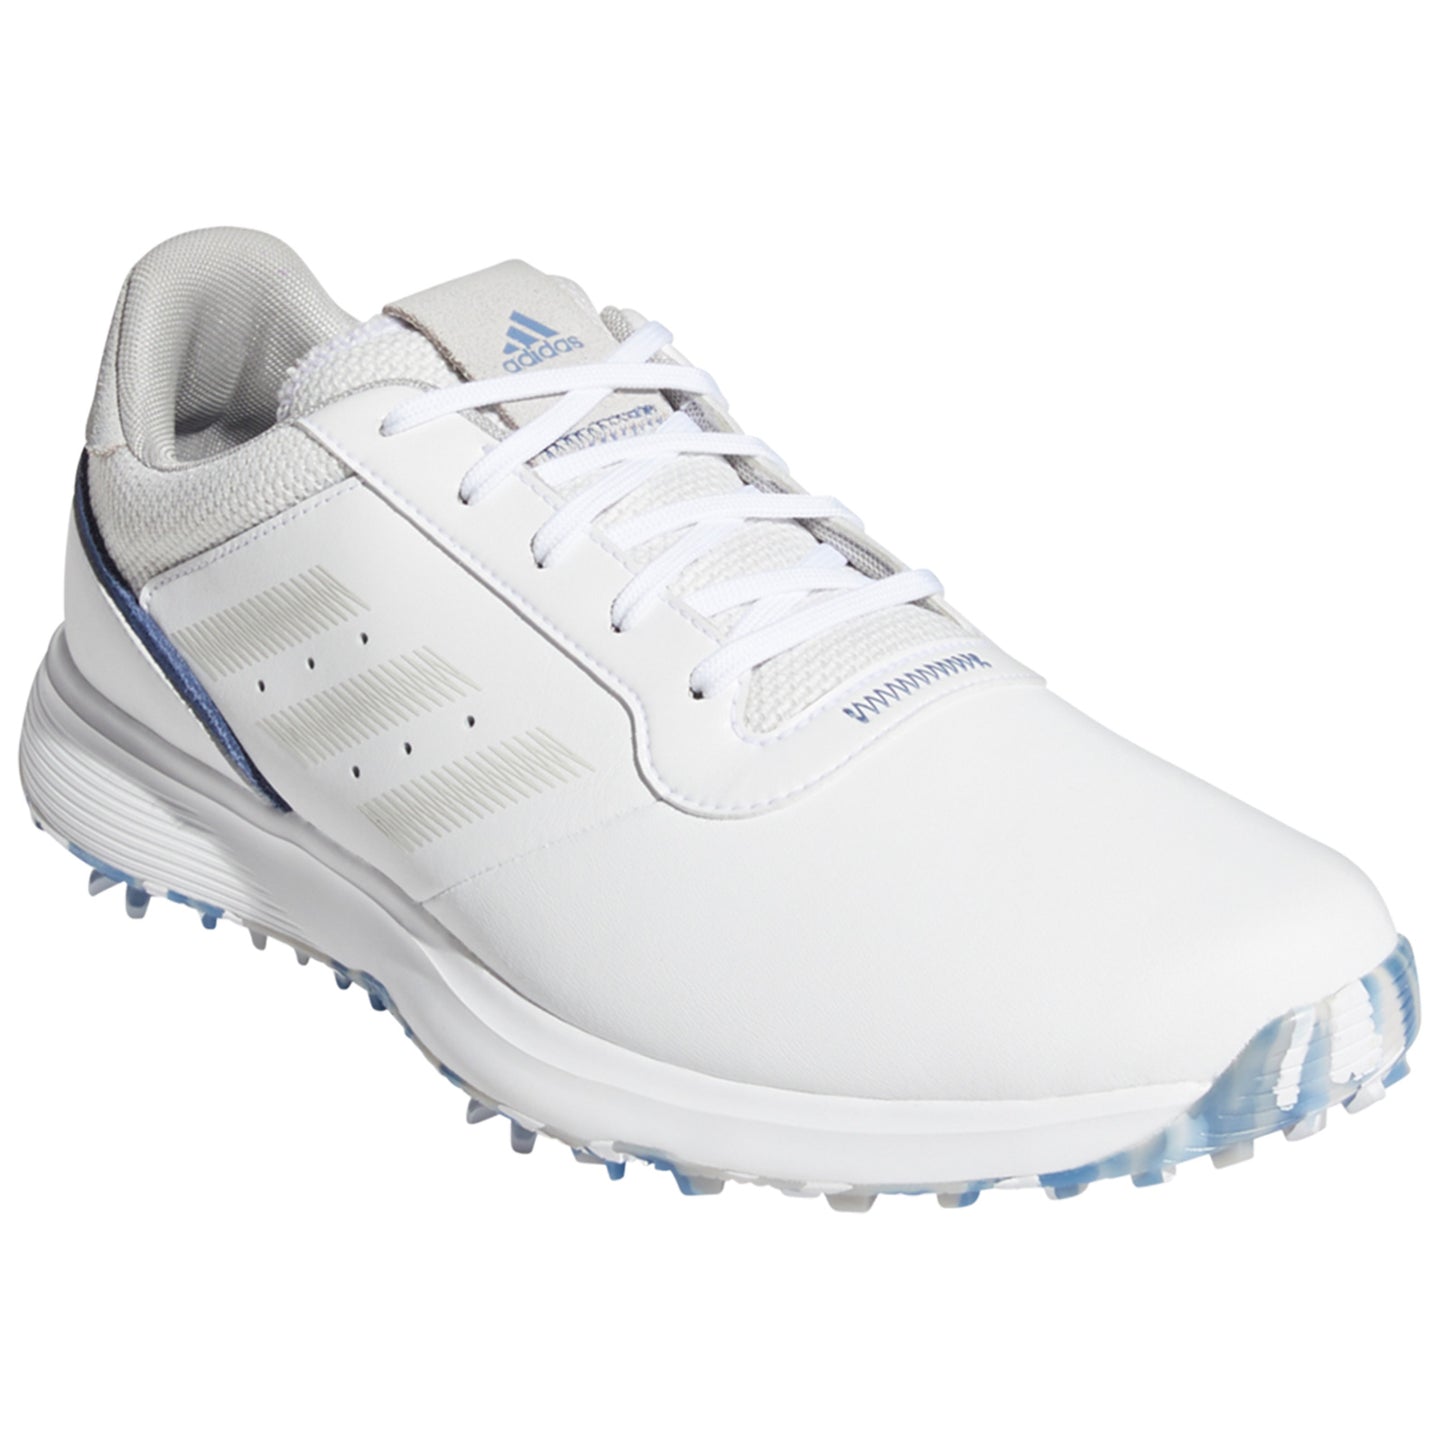 adidas Mens S2G Leather Golf Shoes